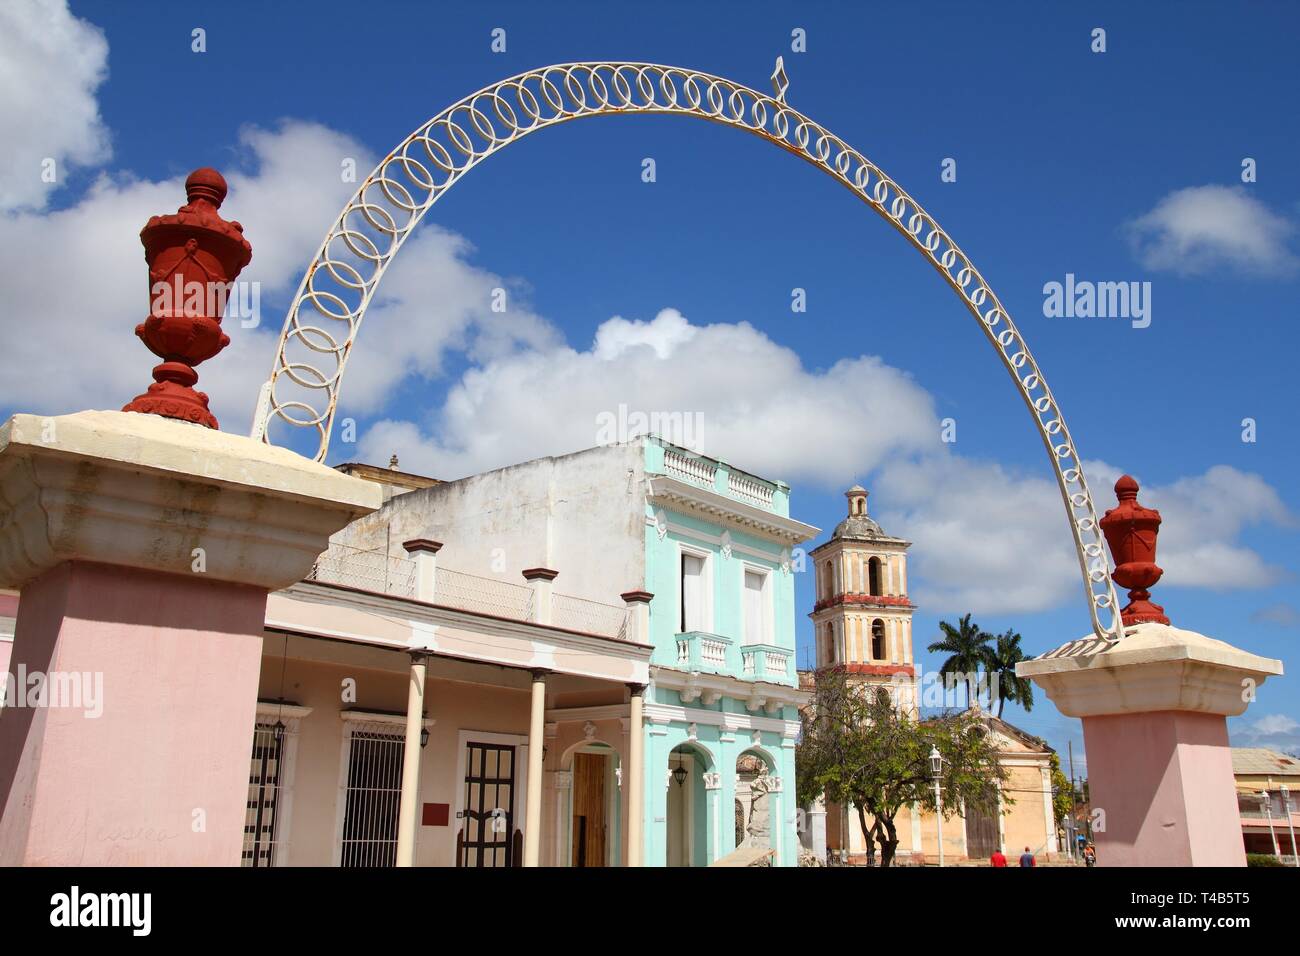 Remedios, Cuba - main square with old architecture Stock Photo